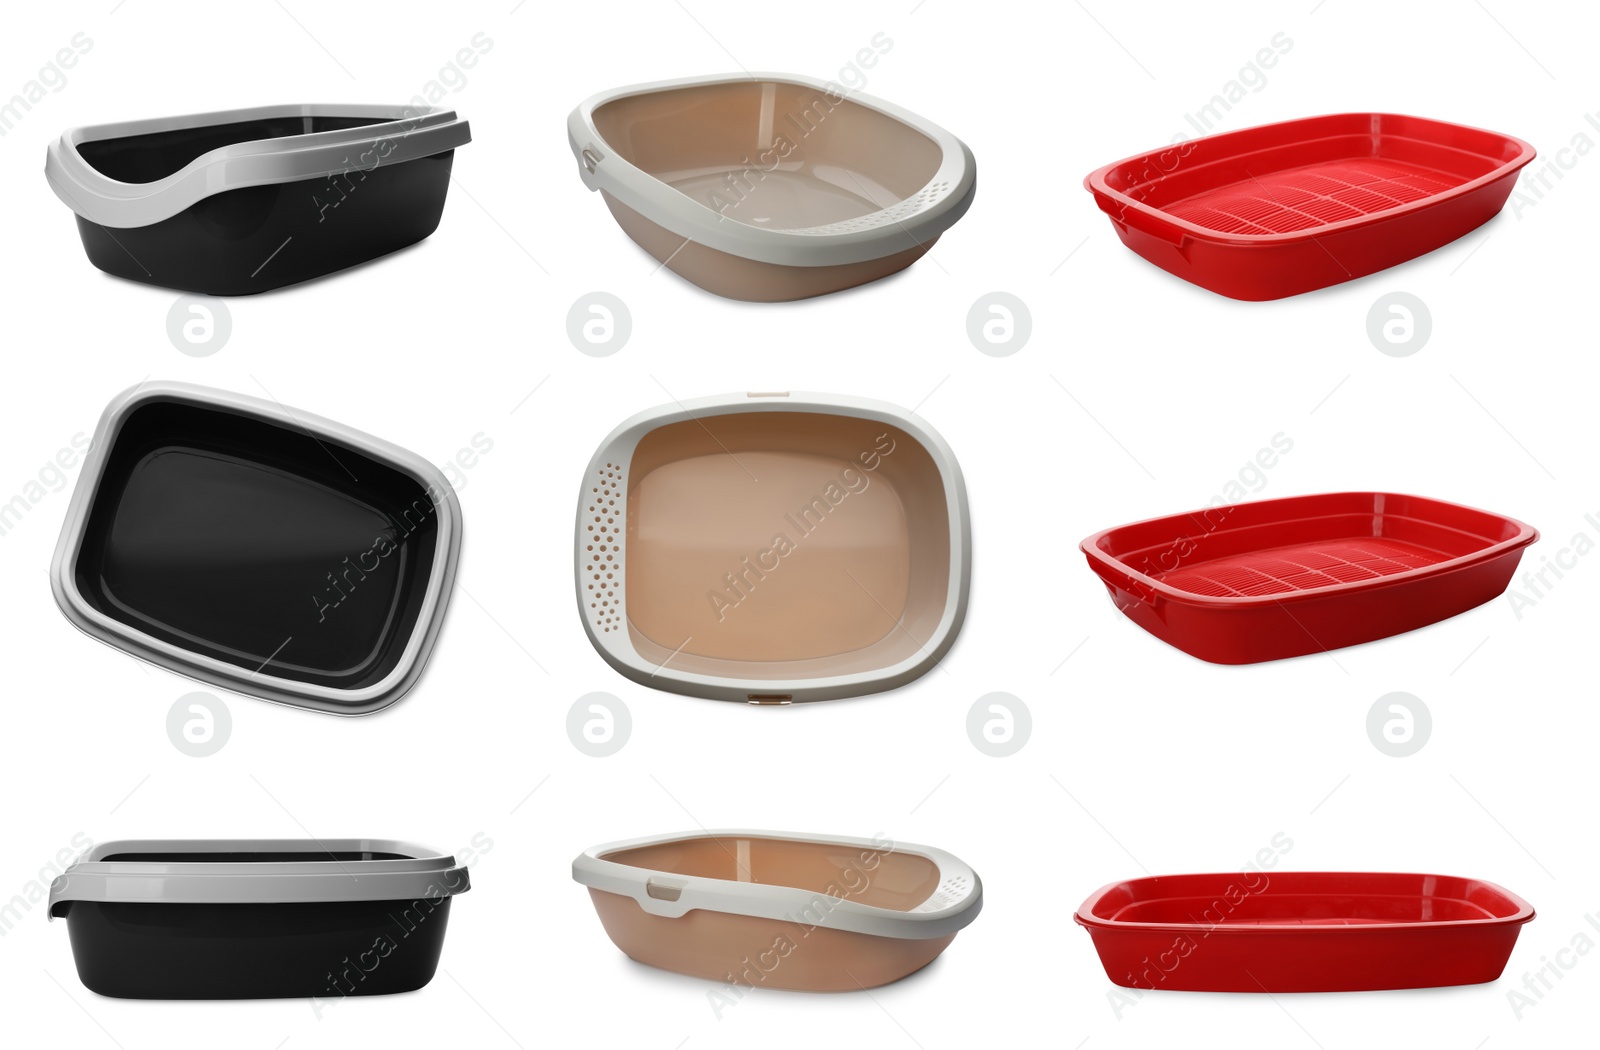 Image of Set with different cat litter trays on white background, view from different sides